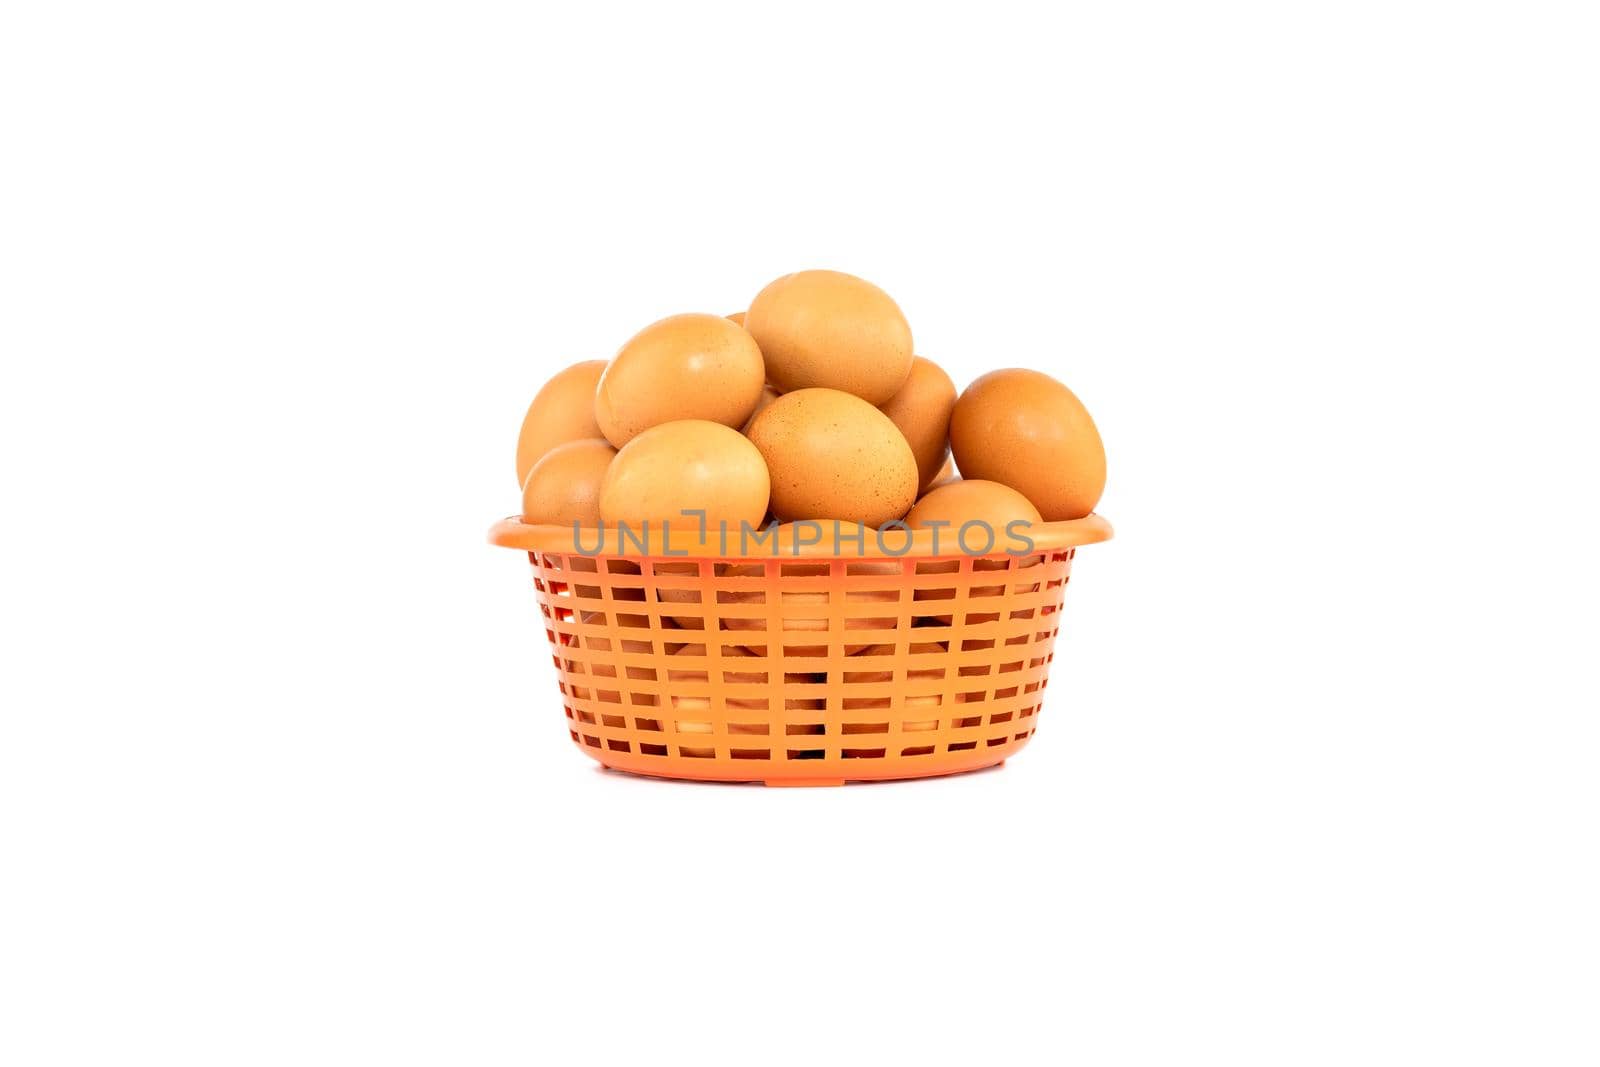 Group of eggs in an orange plastic basket isolated on white background